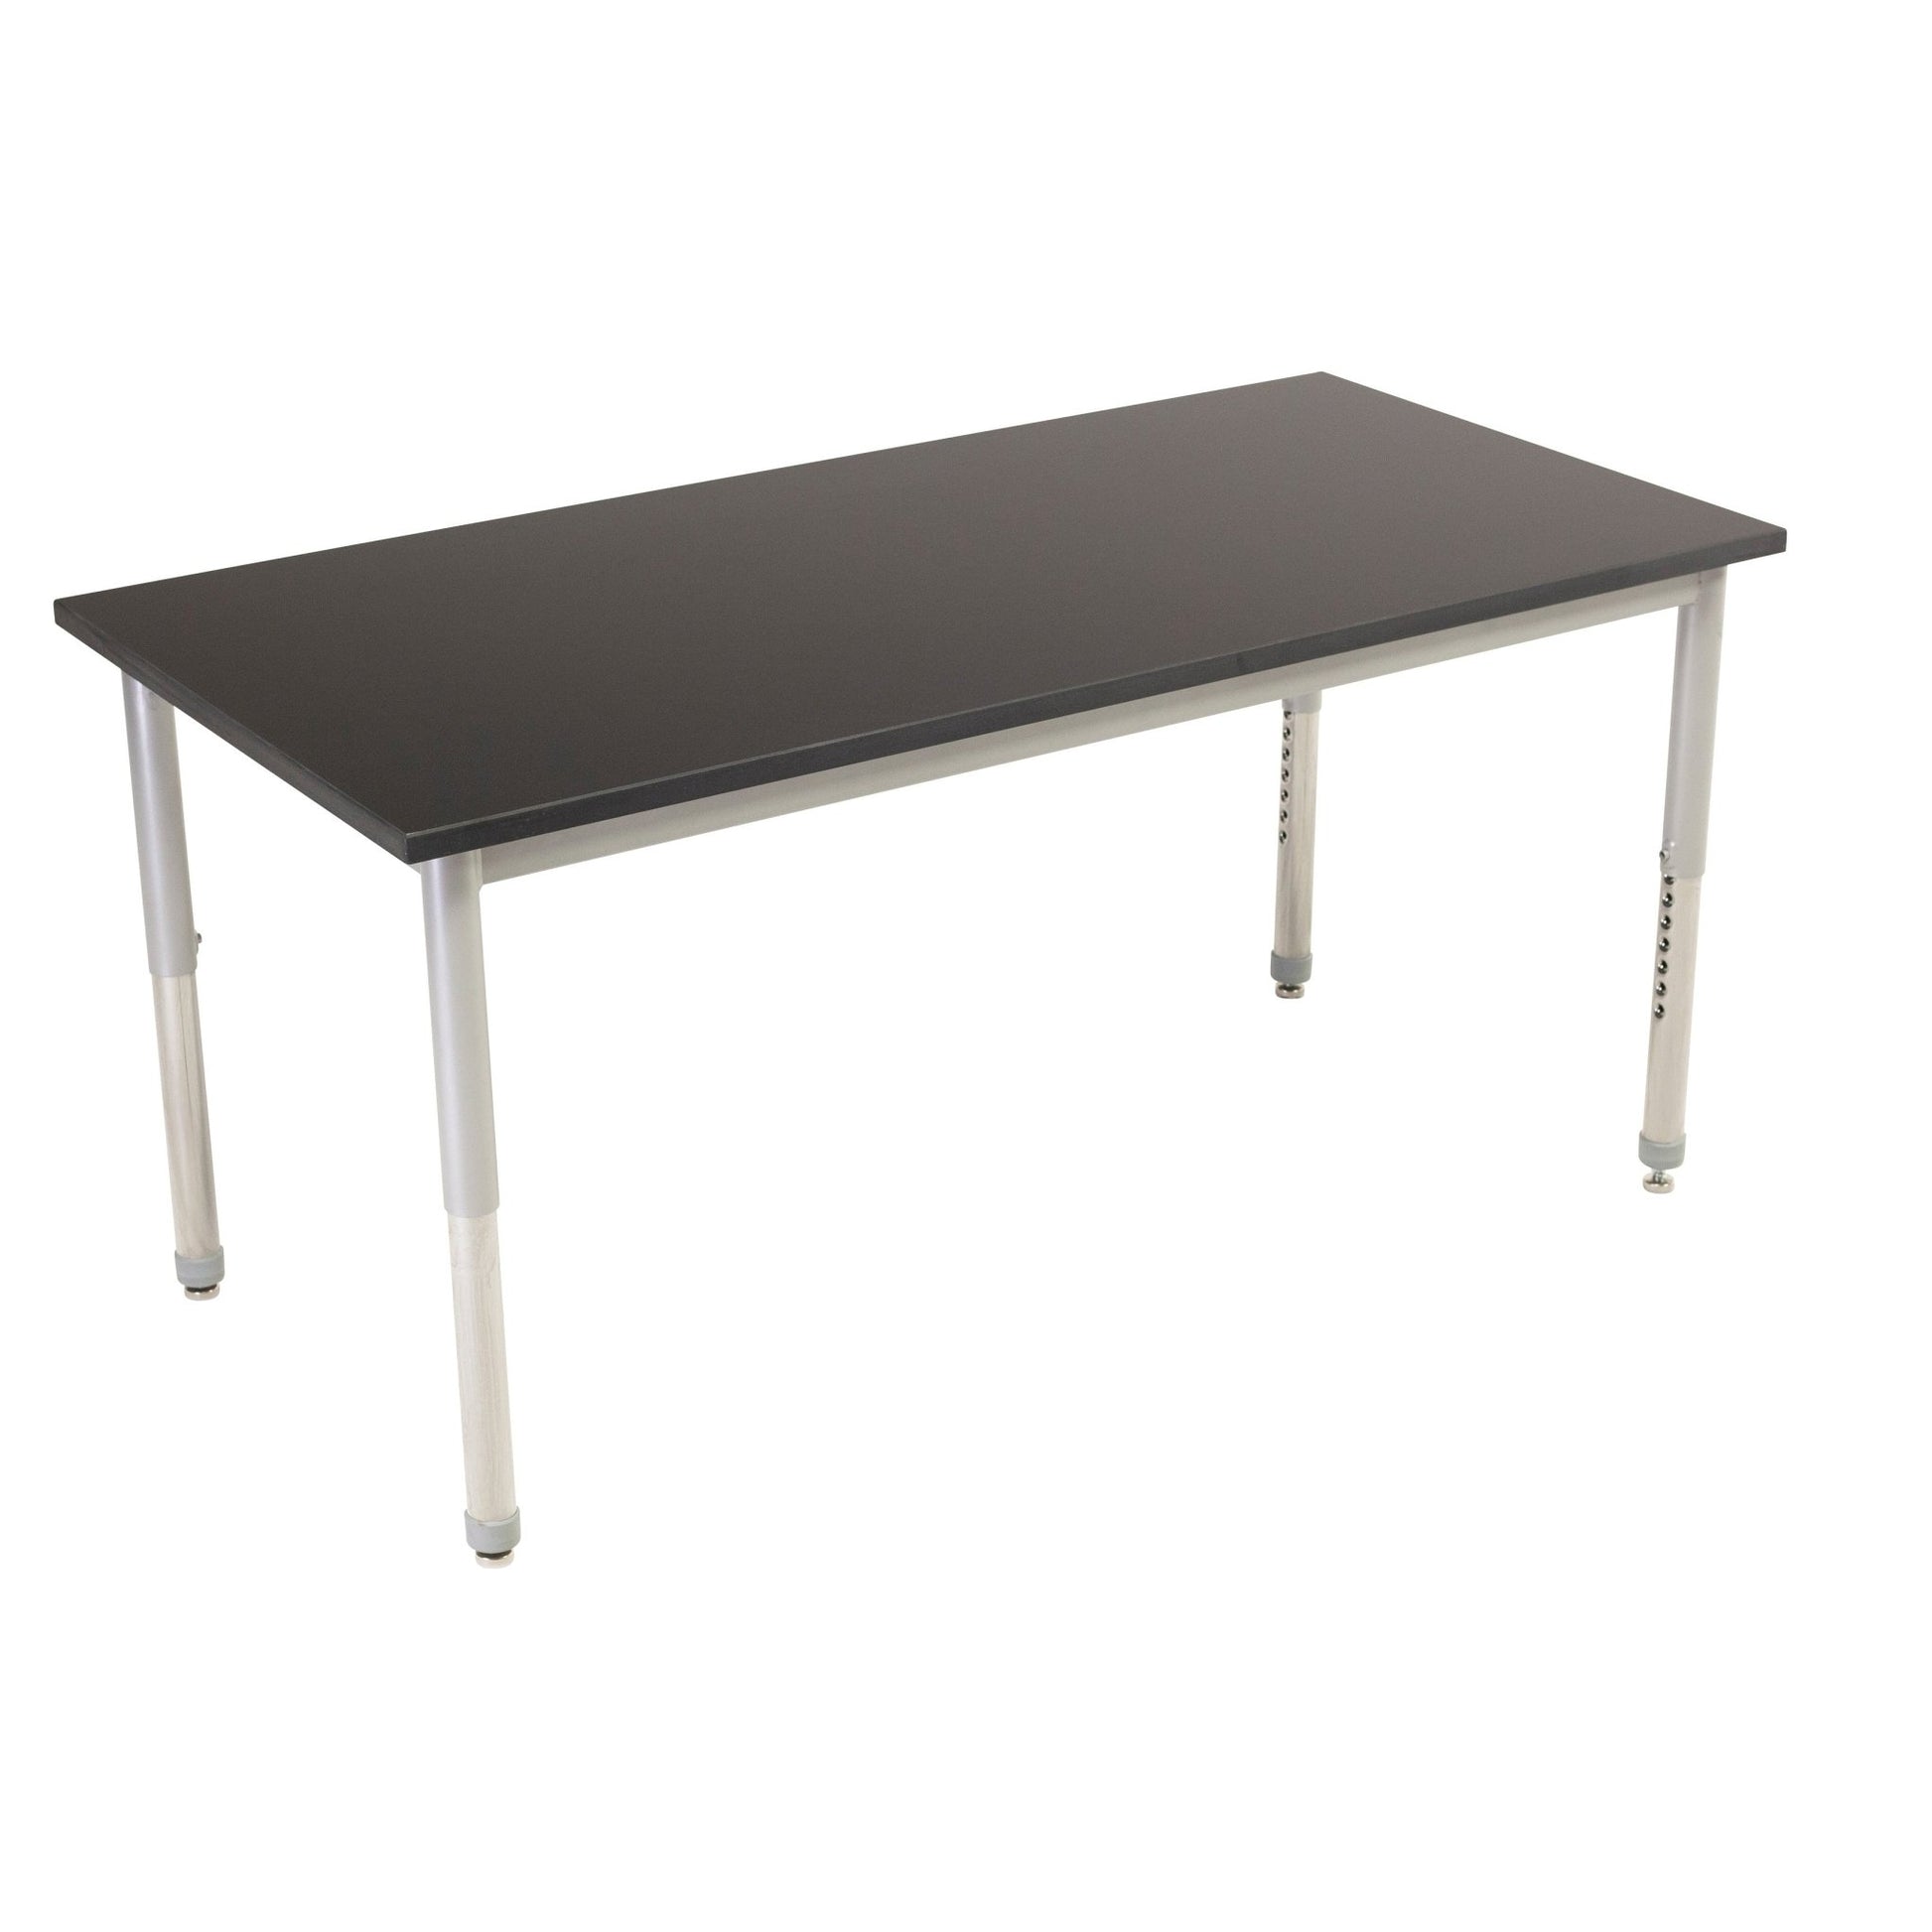 AmTab Science Lab Table - 30"W x 60"L x Adjustable Height 30" to 38" - Phenolic Resin Chem Res Top (AMT-SCI305PR) - SchoolOutlet